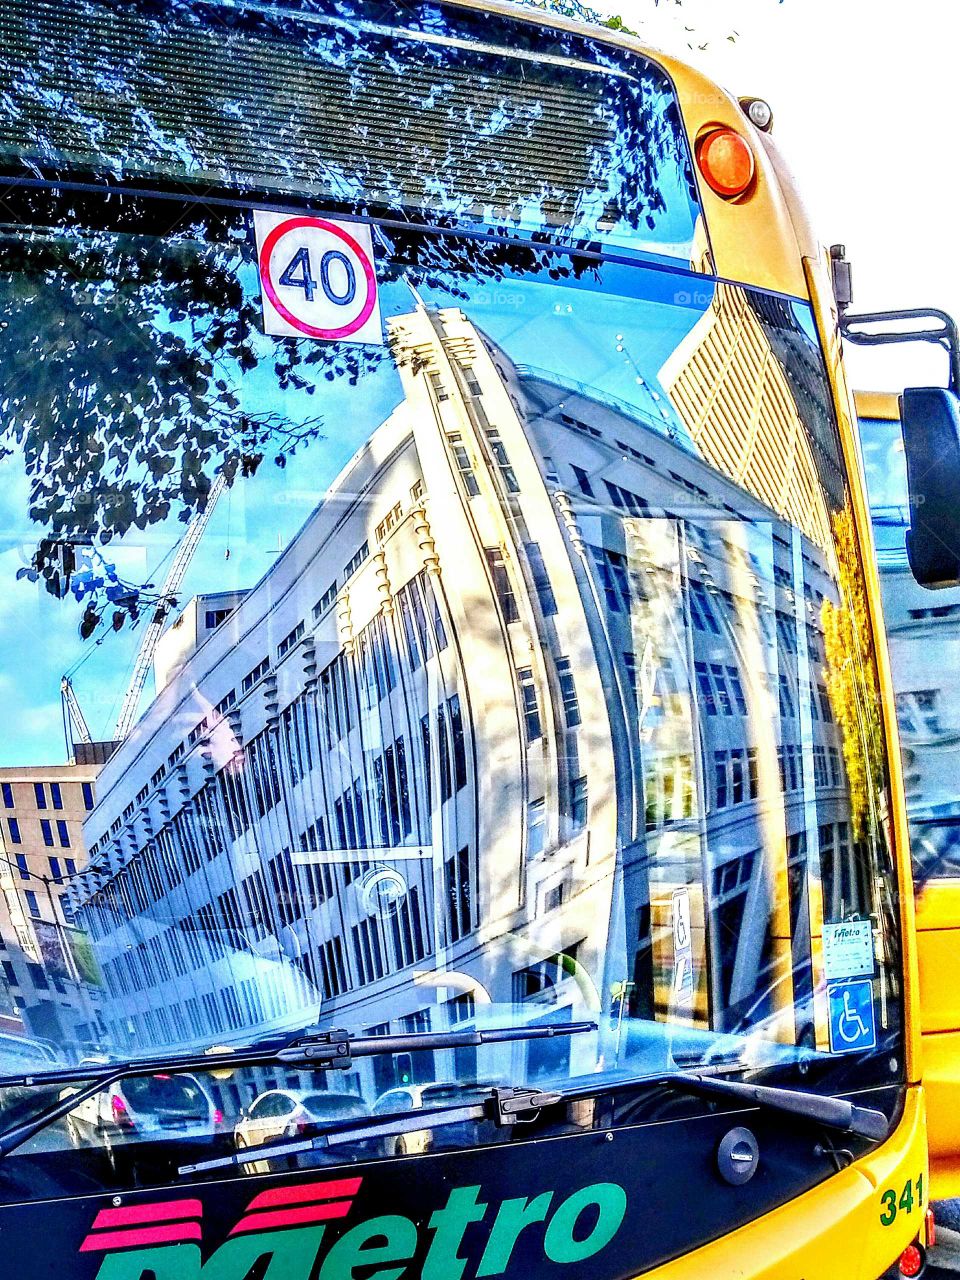 building reflection in bus window